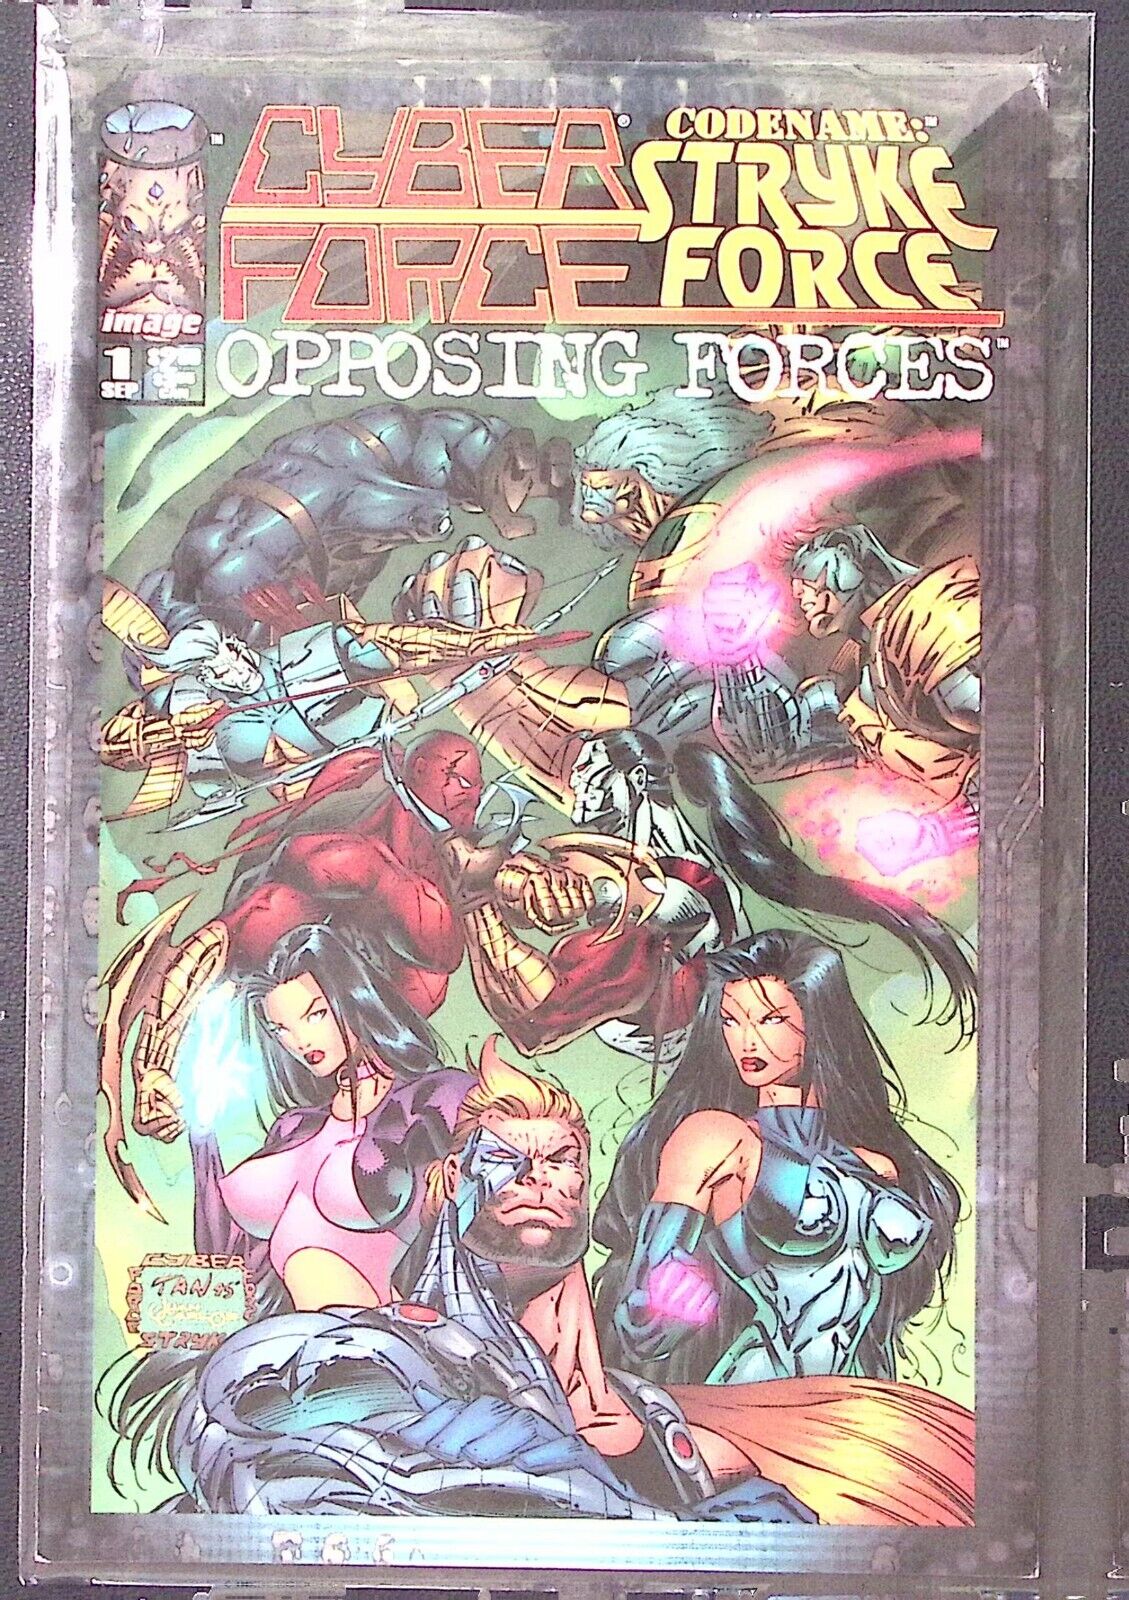 1995 CYBER FORCE CODENAME:STRYKE FORCE #1 SEPT OPPOSING FORCES IMAGE EXC  Z2013